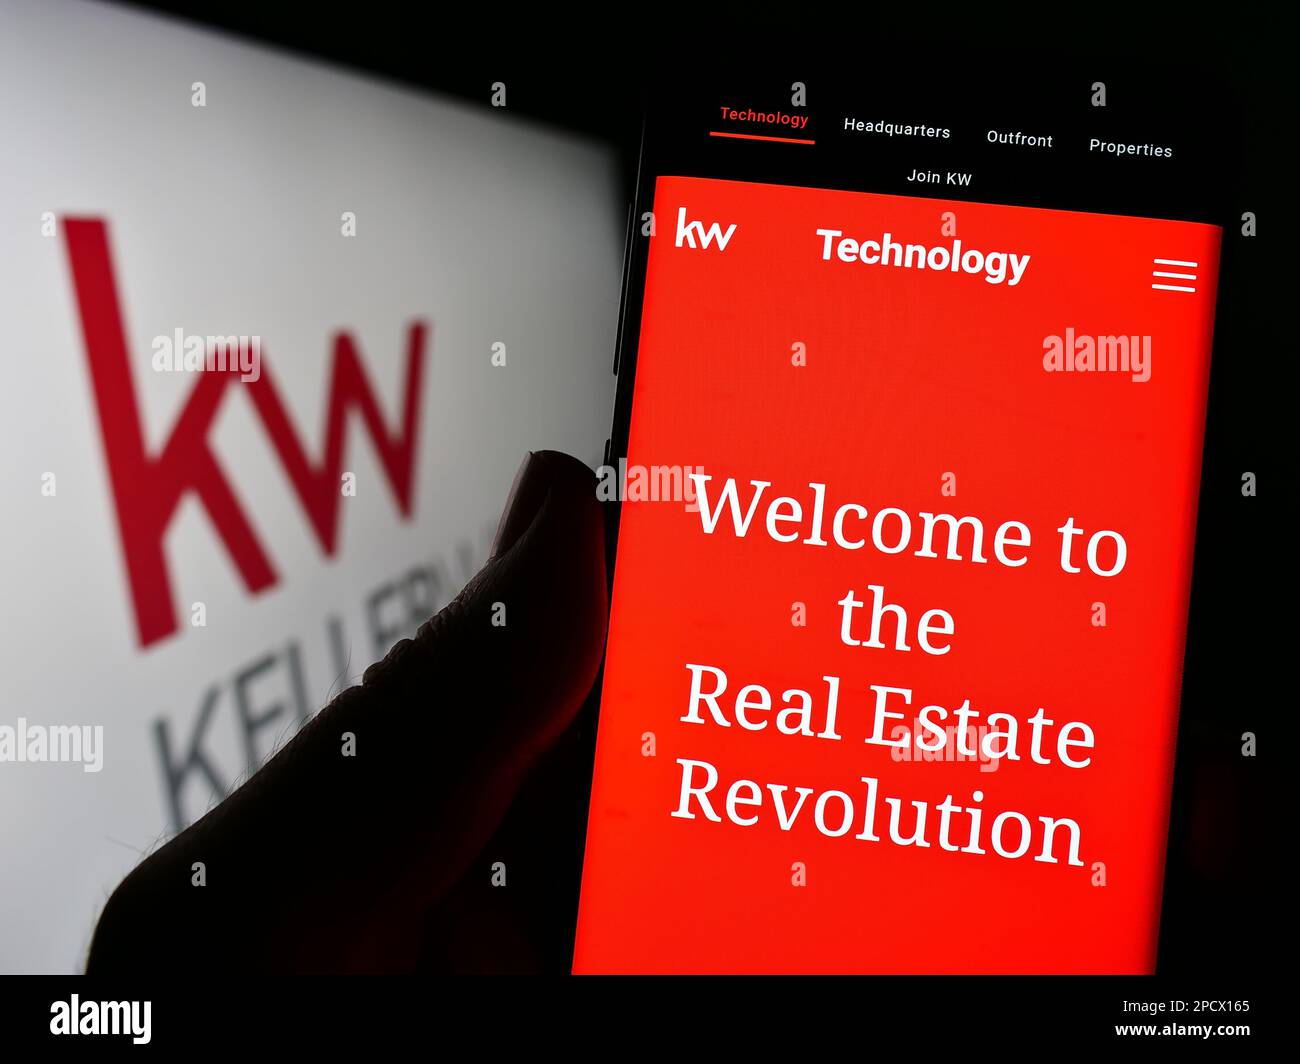 Person holding cellphone with webpage of real estate company Keller Williams Realty Inc. on screen with logo. Focus on center of phone display. Stock Photo